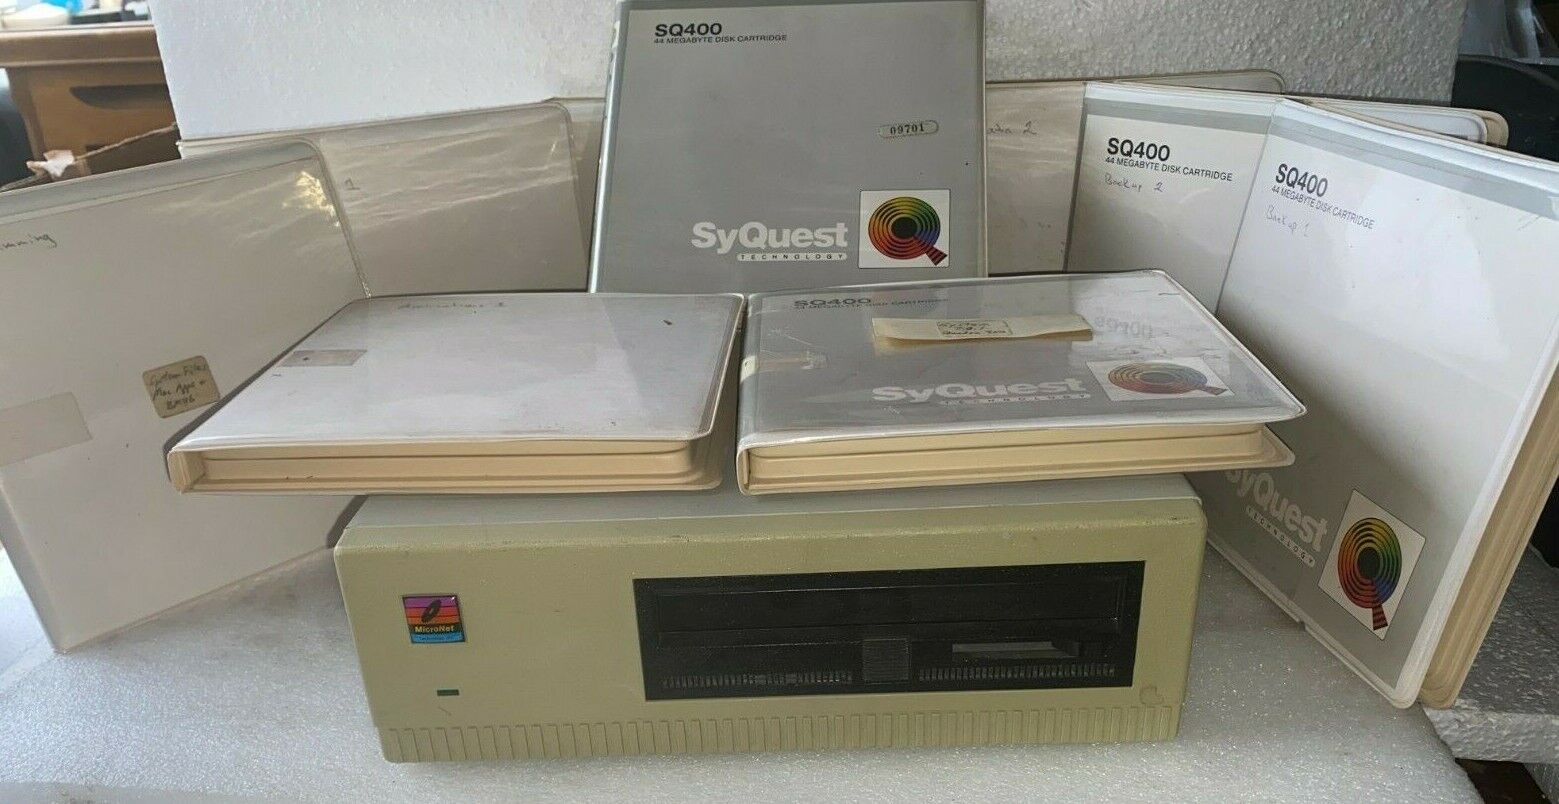 MICRONET MR-45 EXTERNAL SCSI ENCLOSURE WITH SYQUEST 9 TAPE CARTRIDGES GAMES 1++